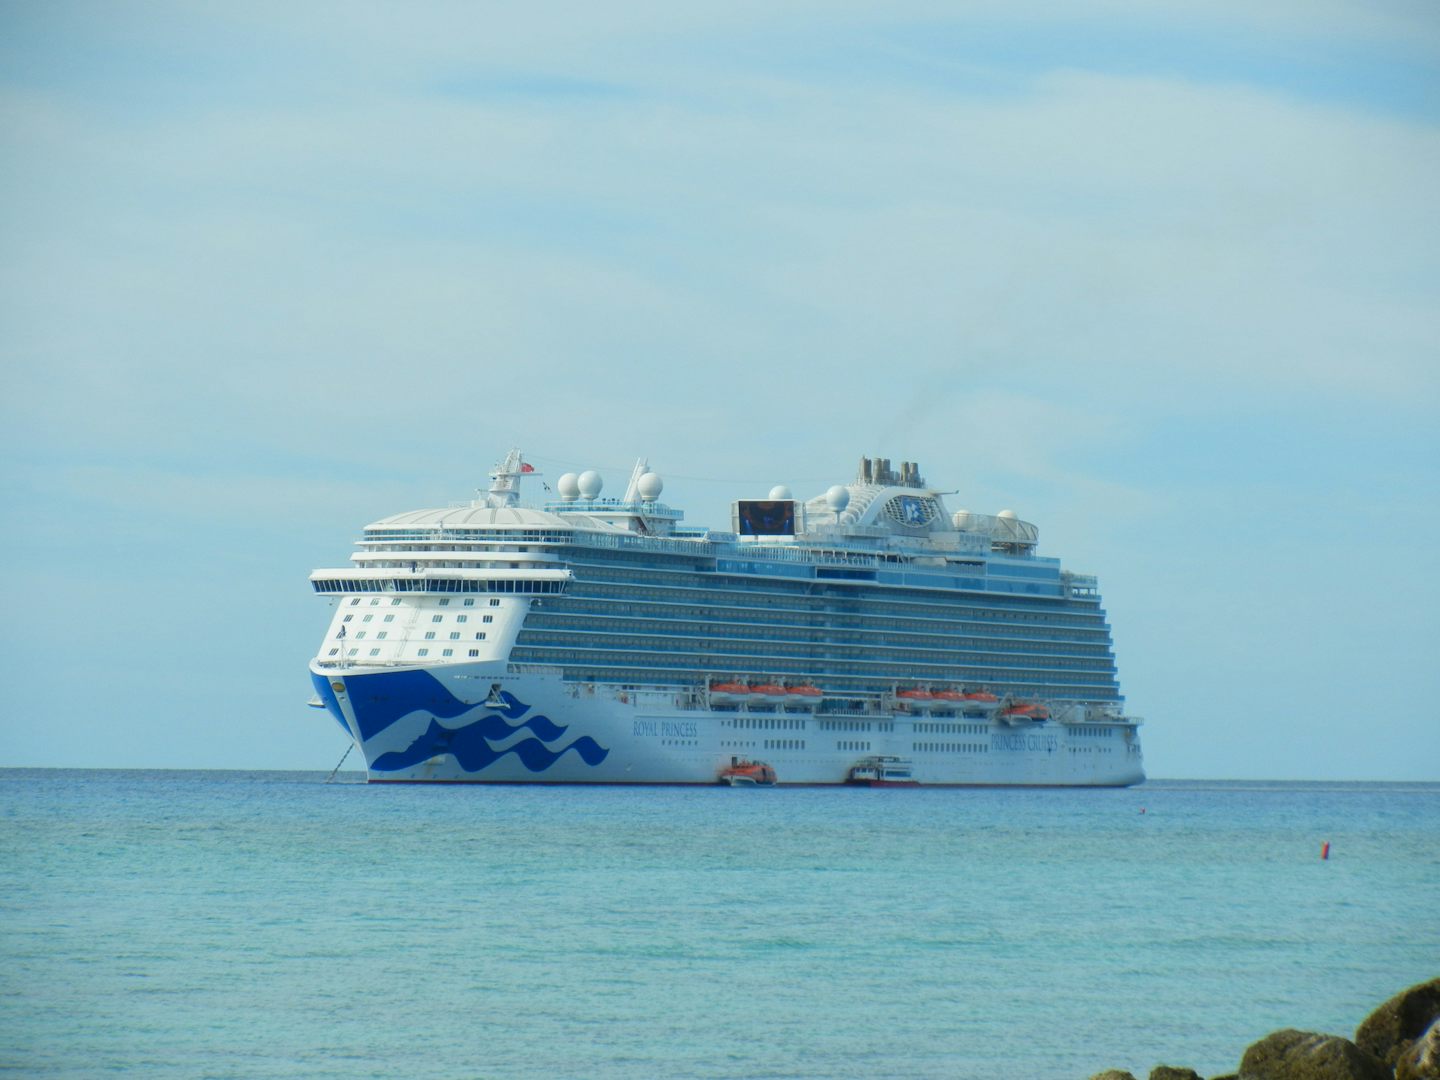 The Princess Royal from Princess Cay, their out island.